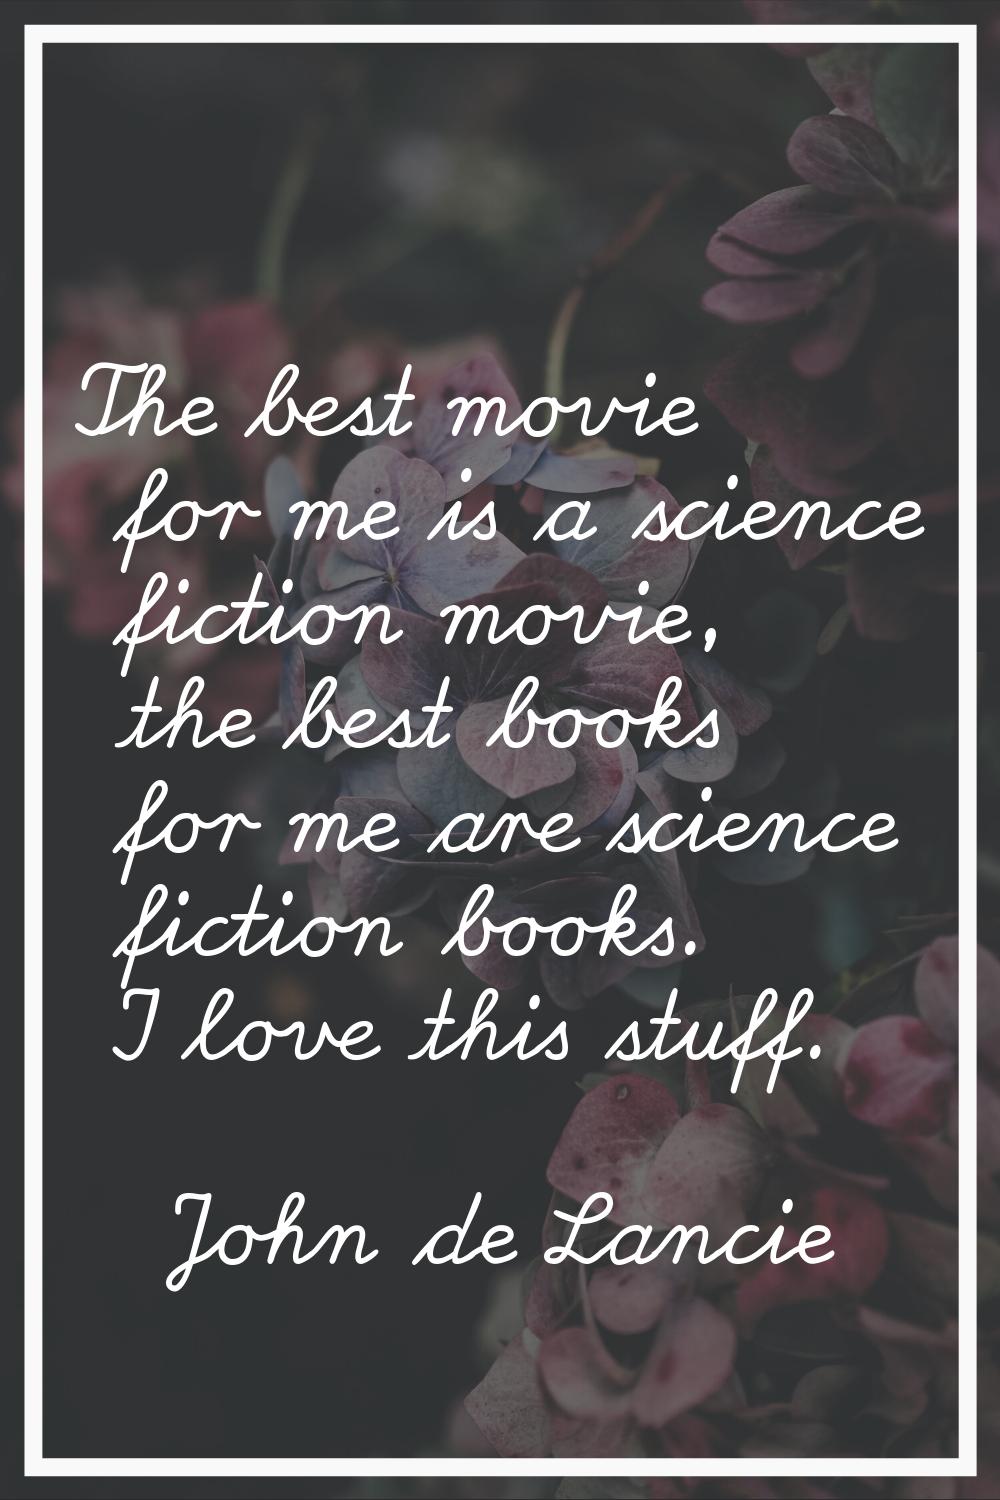 The best movie for me is a science fiction movie, the best books for me are science fiction books. 